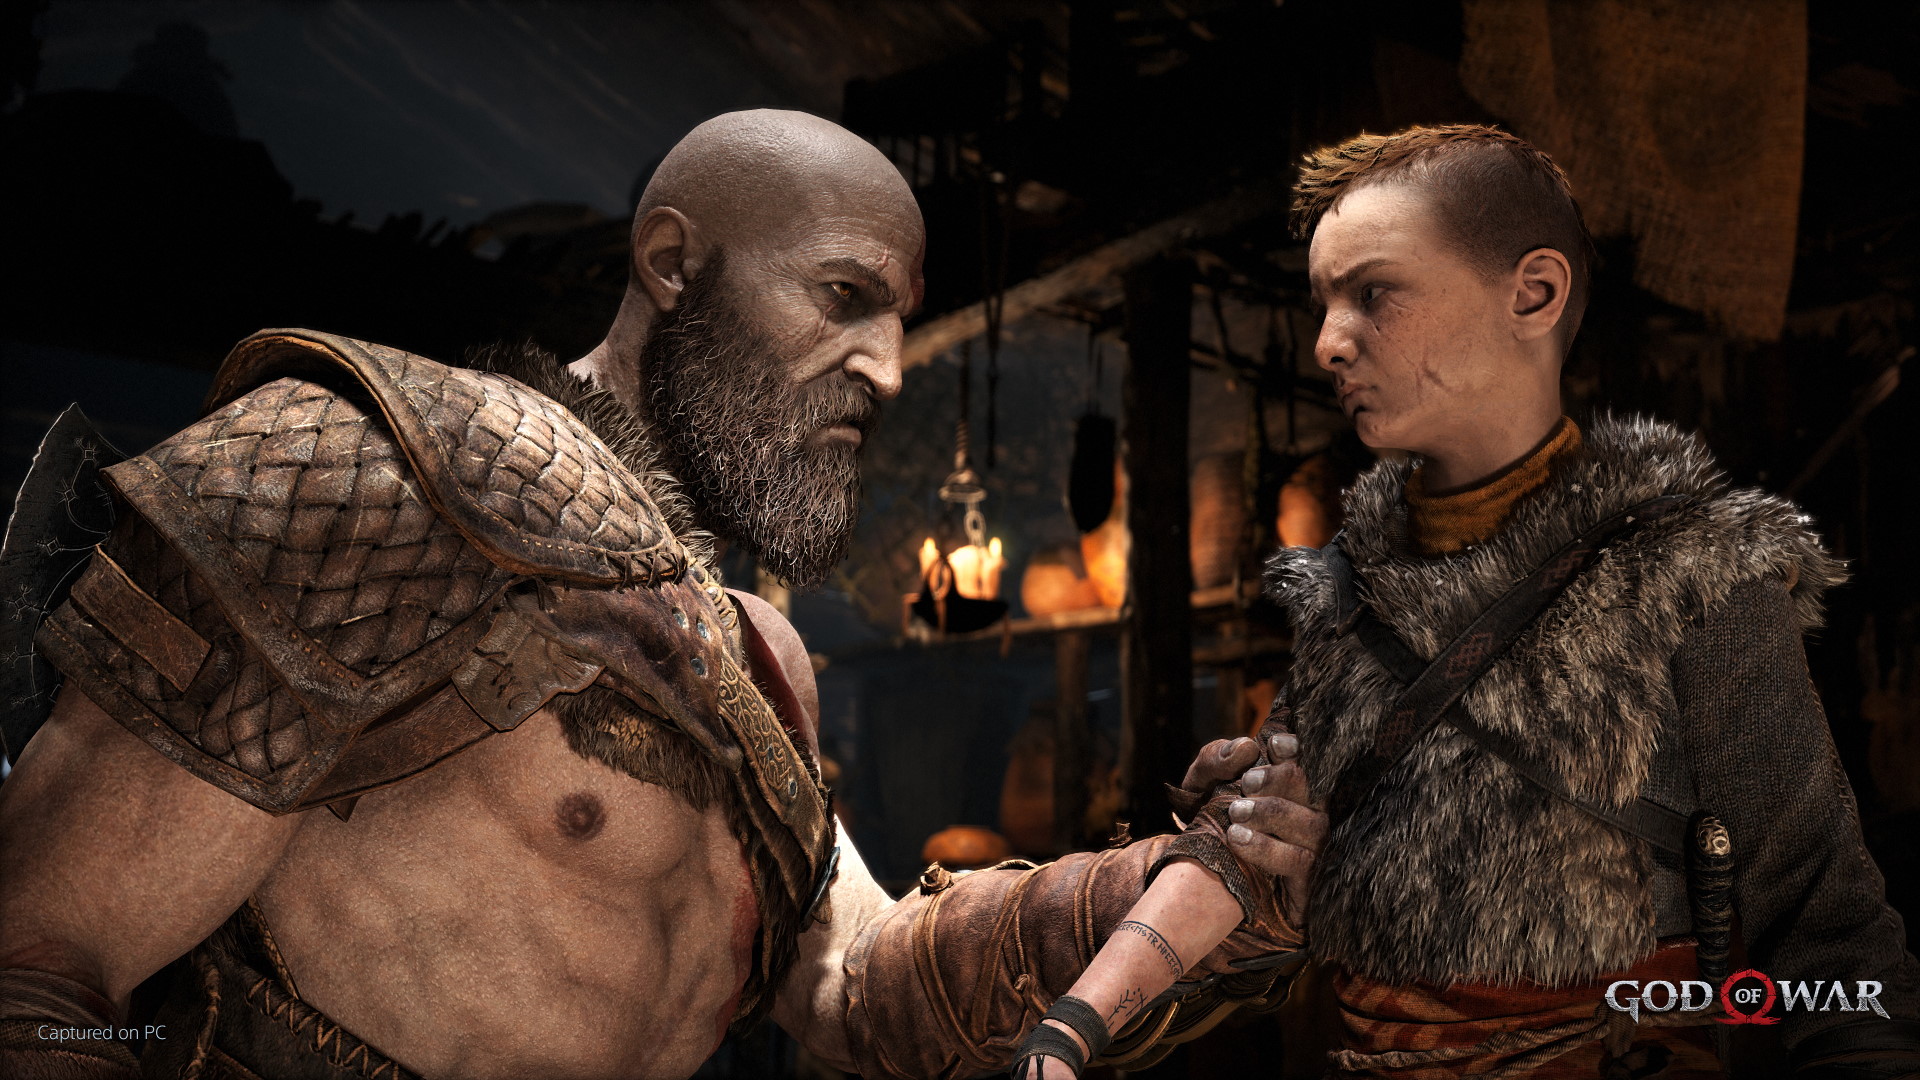 God of War’s Kratos was partially inspired by one of the faces of Fight Club